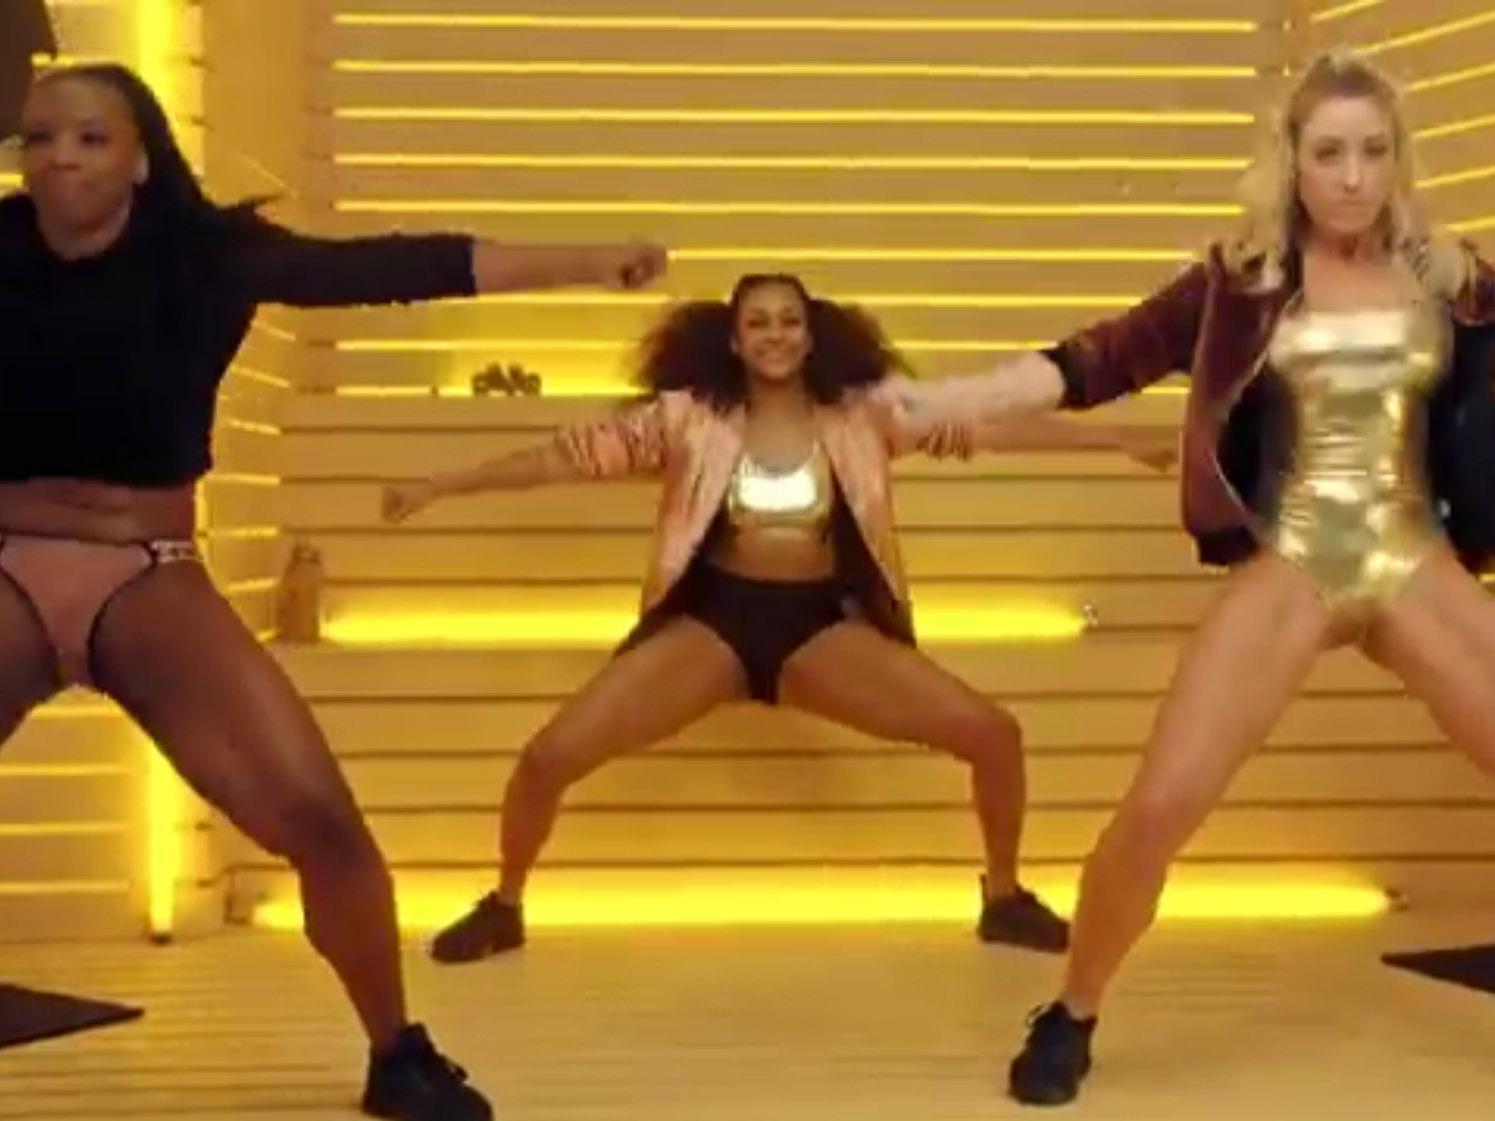 A still from a video-on-demand ad for Femfresh bikini line shaving products featuring several women wearing briefs and swimwear while dancing